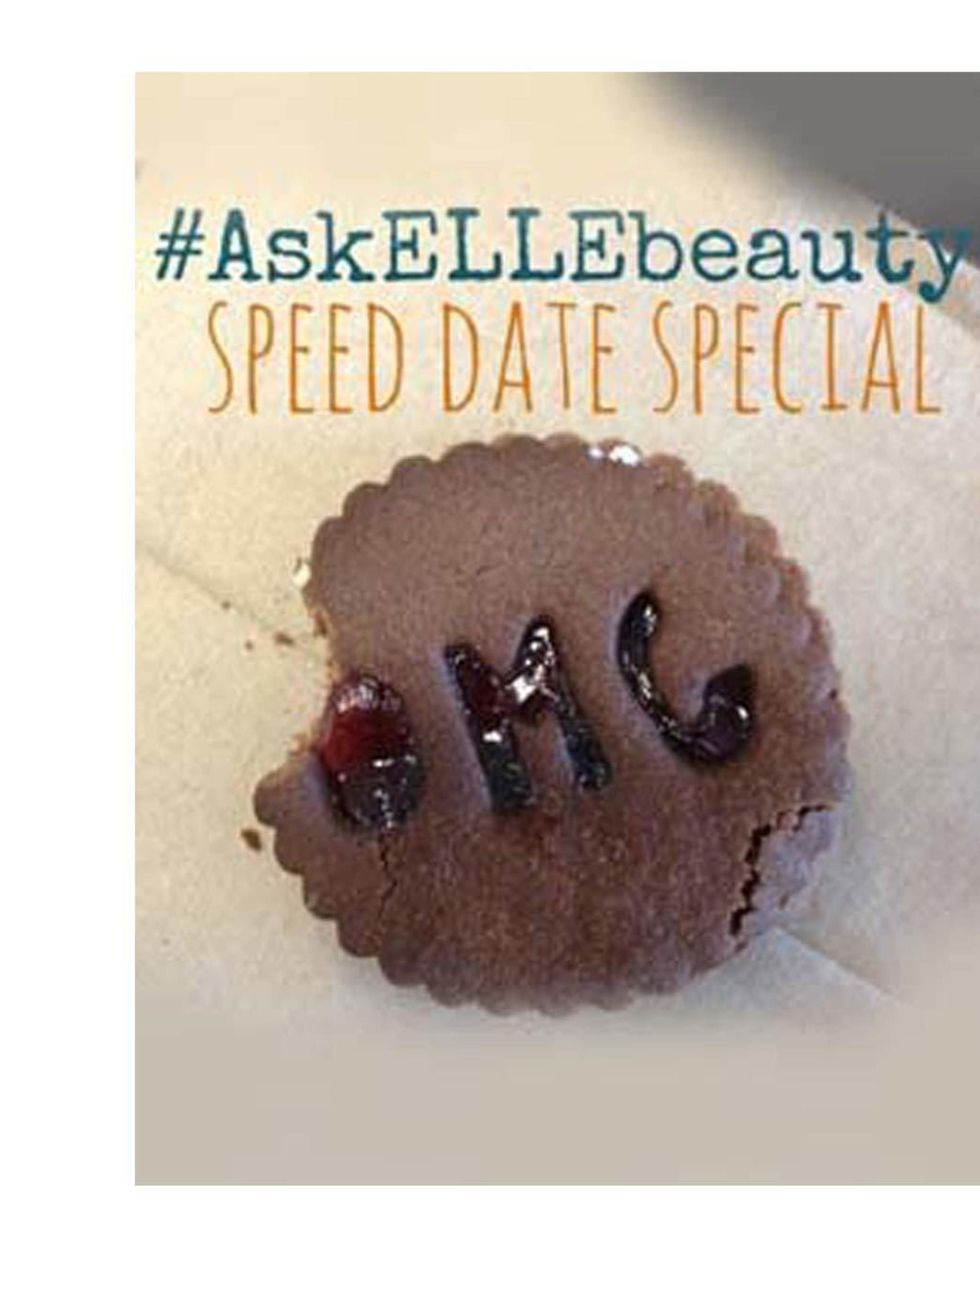 <p>ELLE happened to be away (staying at the wedding venue of Mr &amp; Mrs Pitt we might add), with an entire panel of serious beauty experts, so we asked for your <a href="http://www.elleuk.com/beauty/news/ask-elle-beauty-twitter-q-a-josh-wood-adam-reed-c